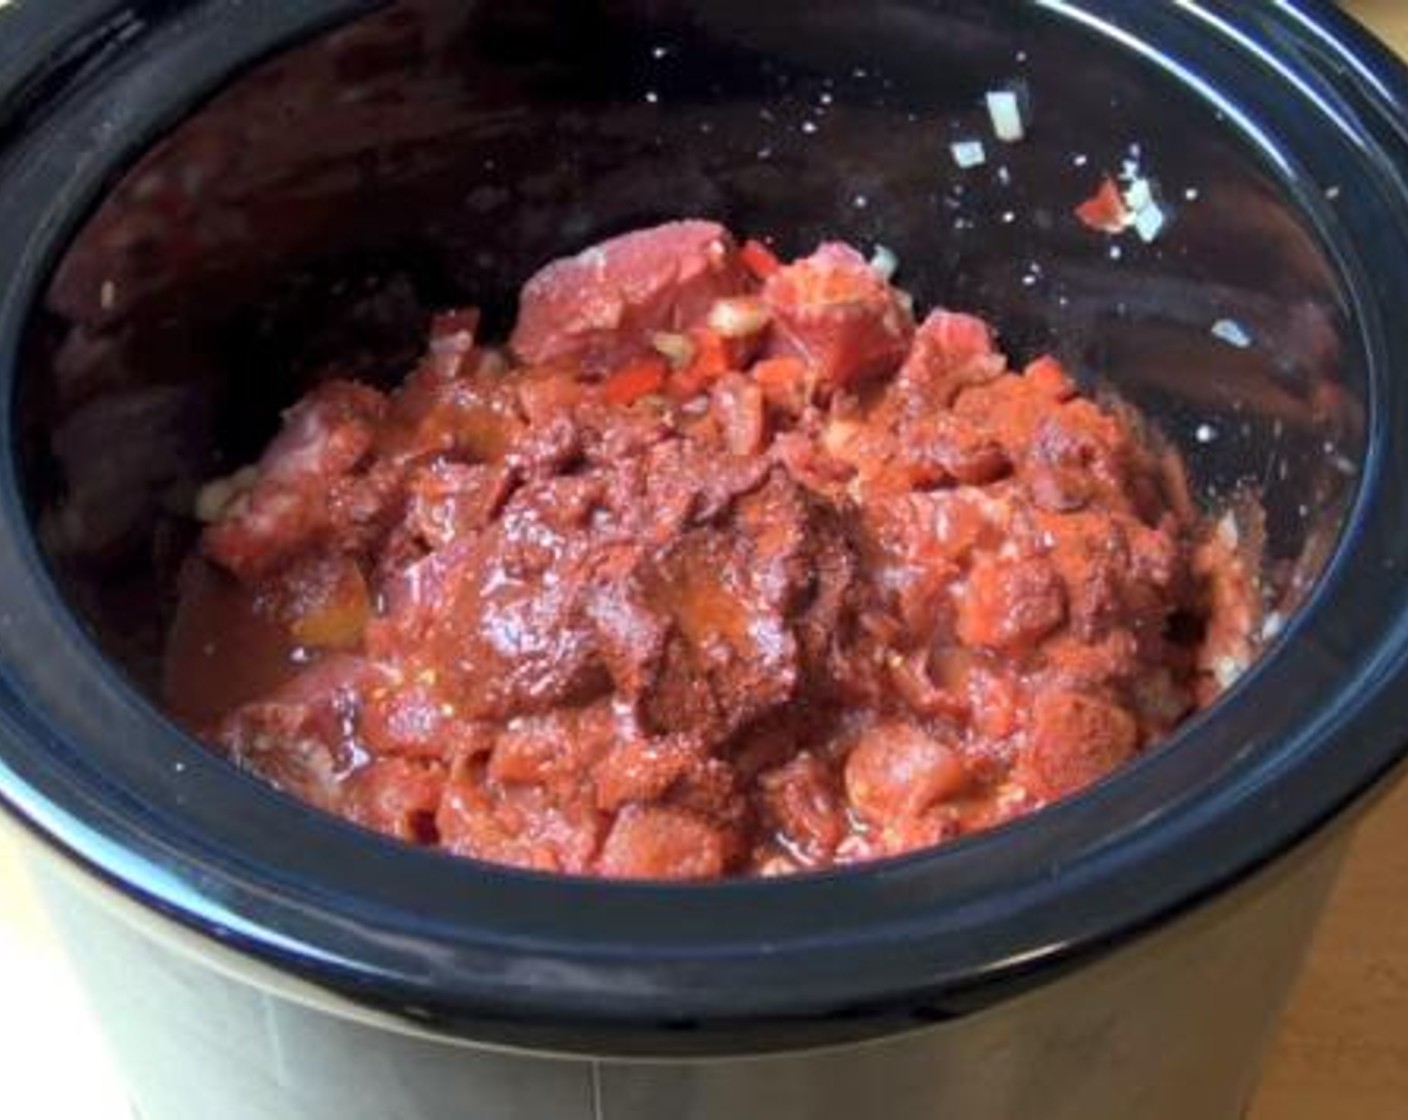 step 1 Into a slow cooker, add the Beef (2.2 lb), Beef Stock (1/2 cup), Yellow Onions (2), Garlic (1 clove), Red Bell Peppers (2), Canned Diced Tomatoes (1 3/4 cups), Sweet Paprika (2 Tbsp), Water (1/2 cup), Salt (to taste) and Ground Black Pepper (to taste). Mix everything together, and cook for 8 hours on low.